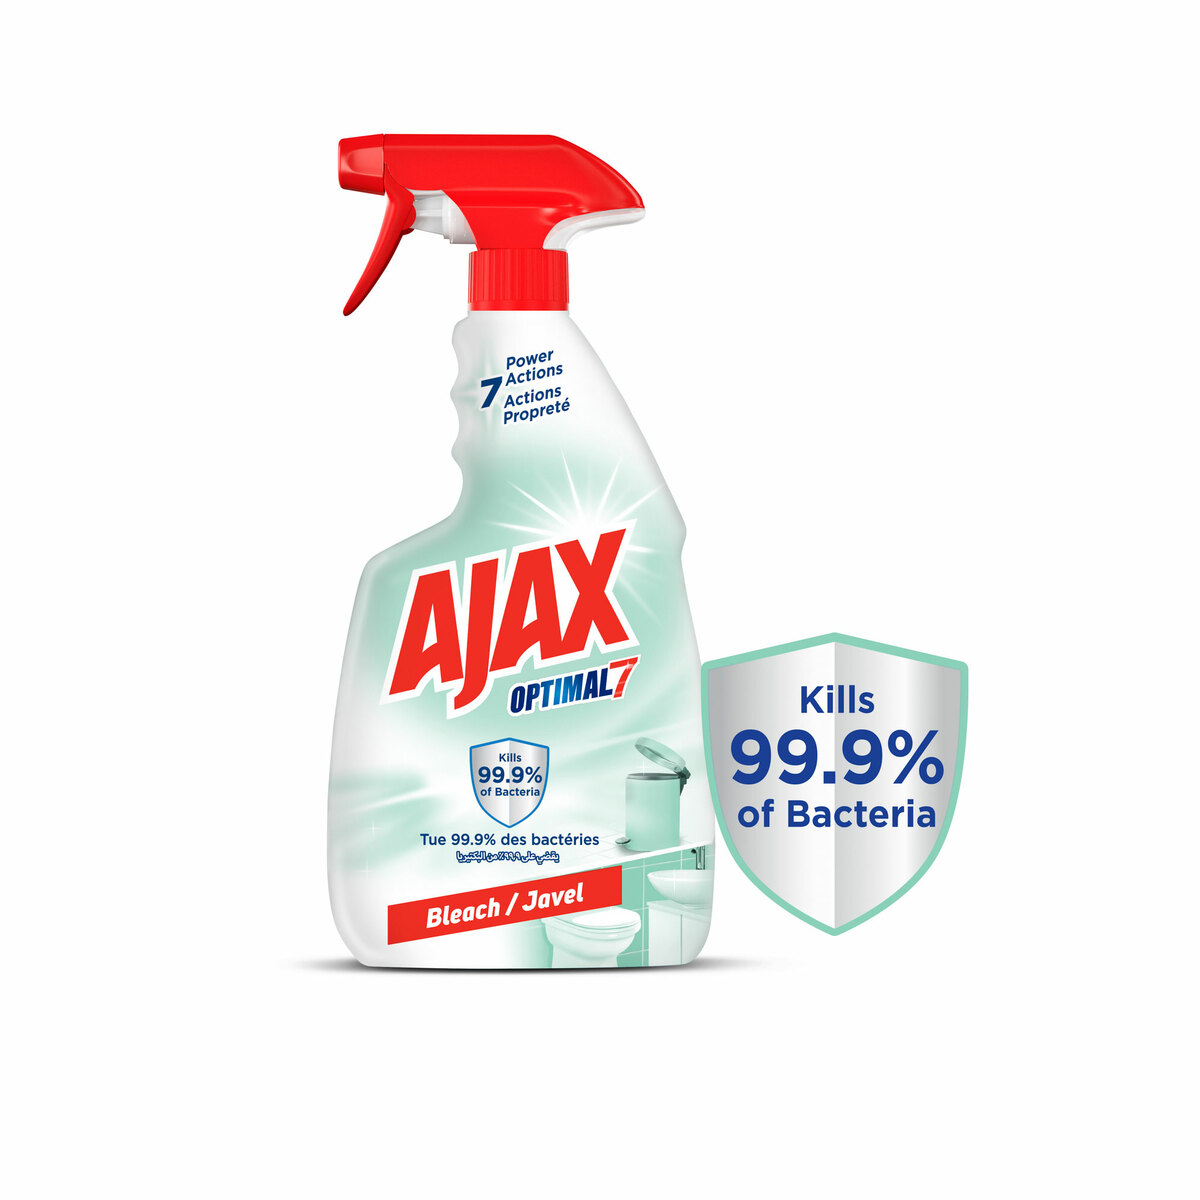 Ajax Surface Cleaner Sanitizer Spray 7in1 Actions Bleach Antibacterial Disinfectant  500ml